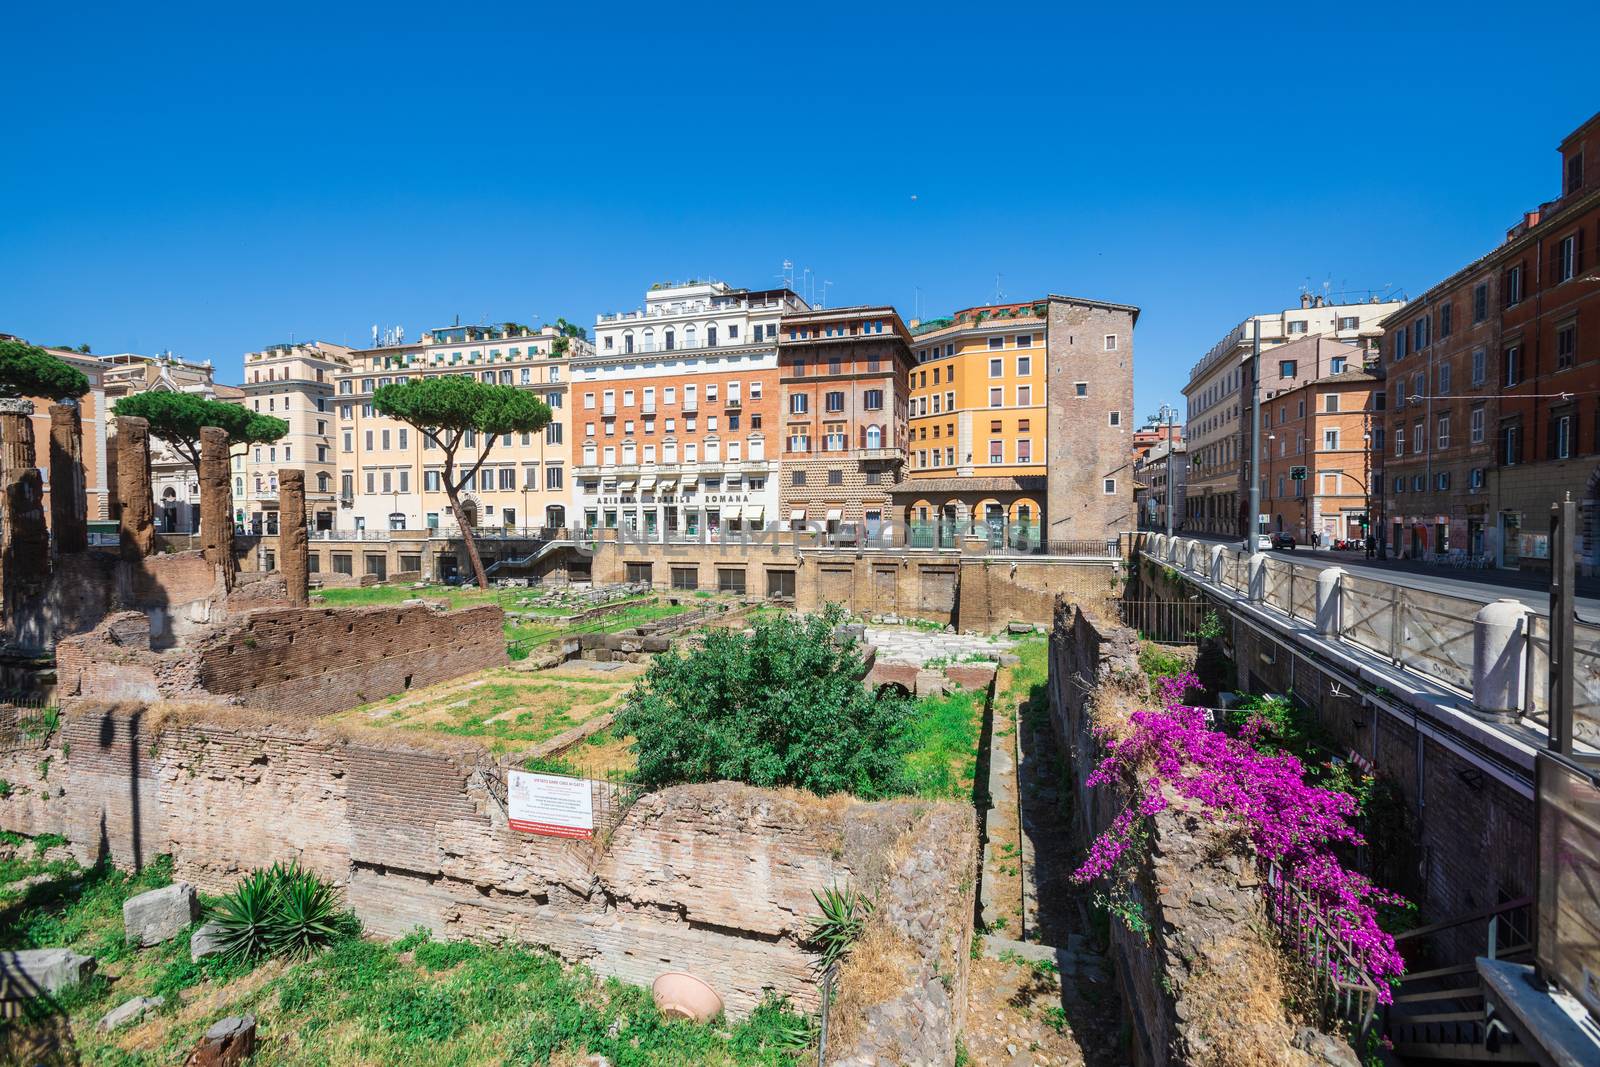 Rome, Italy. May 25, 2020: Largo di Torre Argentina, square in Rome Italy with four Roman Republican temples and the remains of Pompey's Theater. Archeological area.